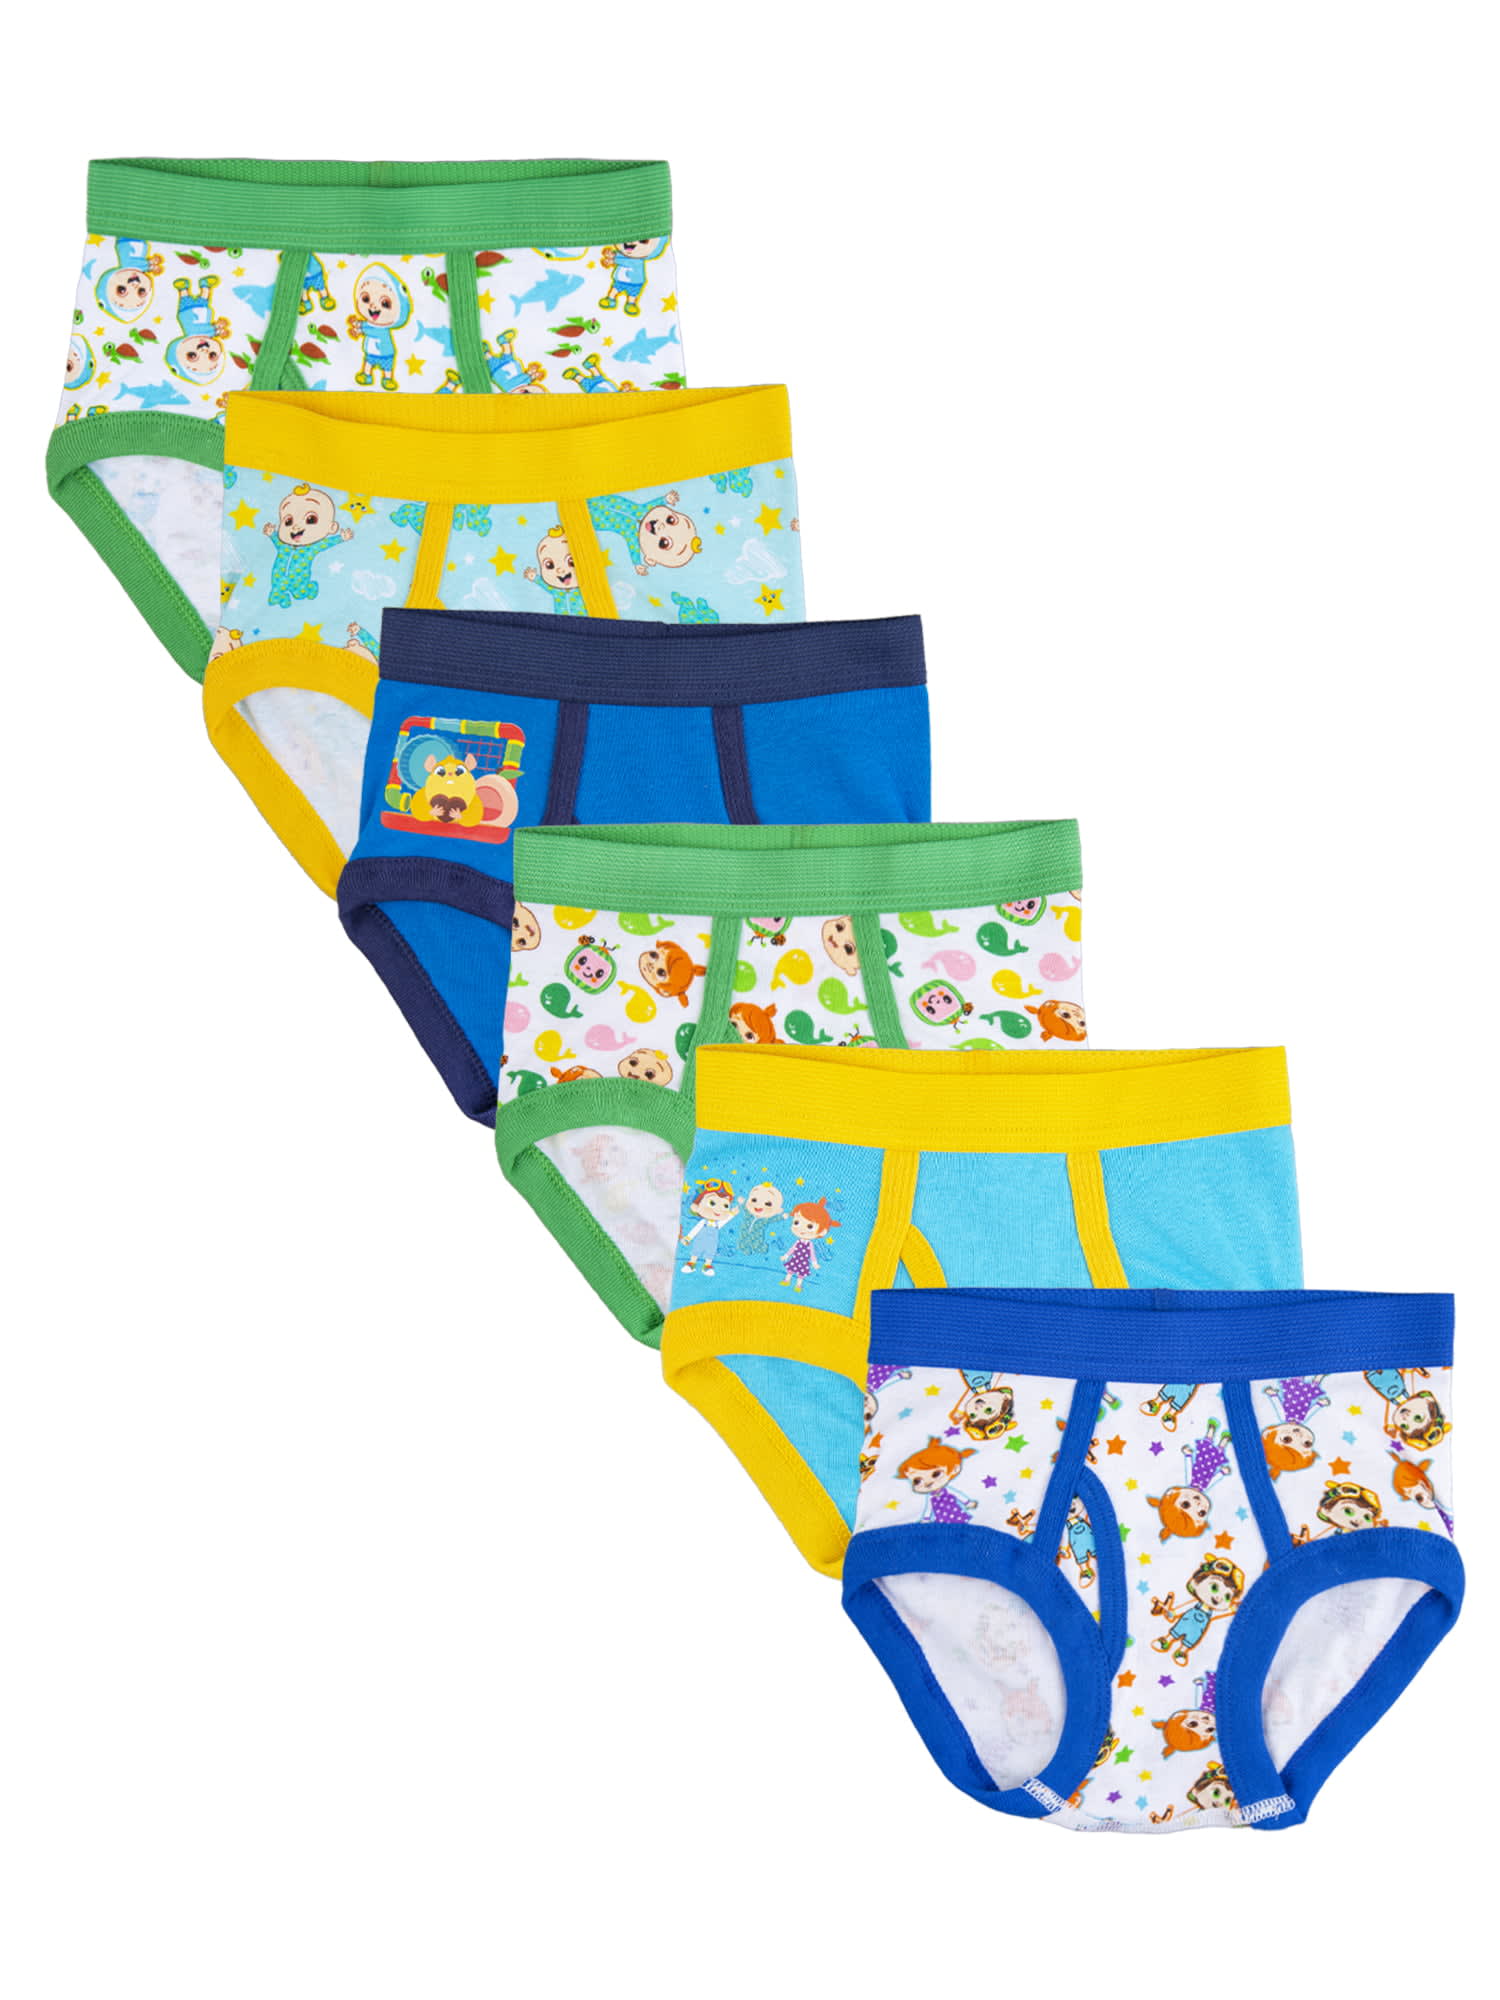 Cocomelon Toddler Boys Underwear, 6-Pack, Sizes 2T-4T - DroneUp